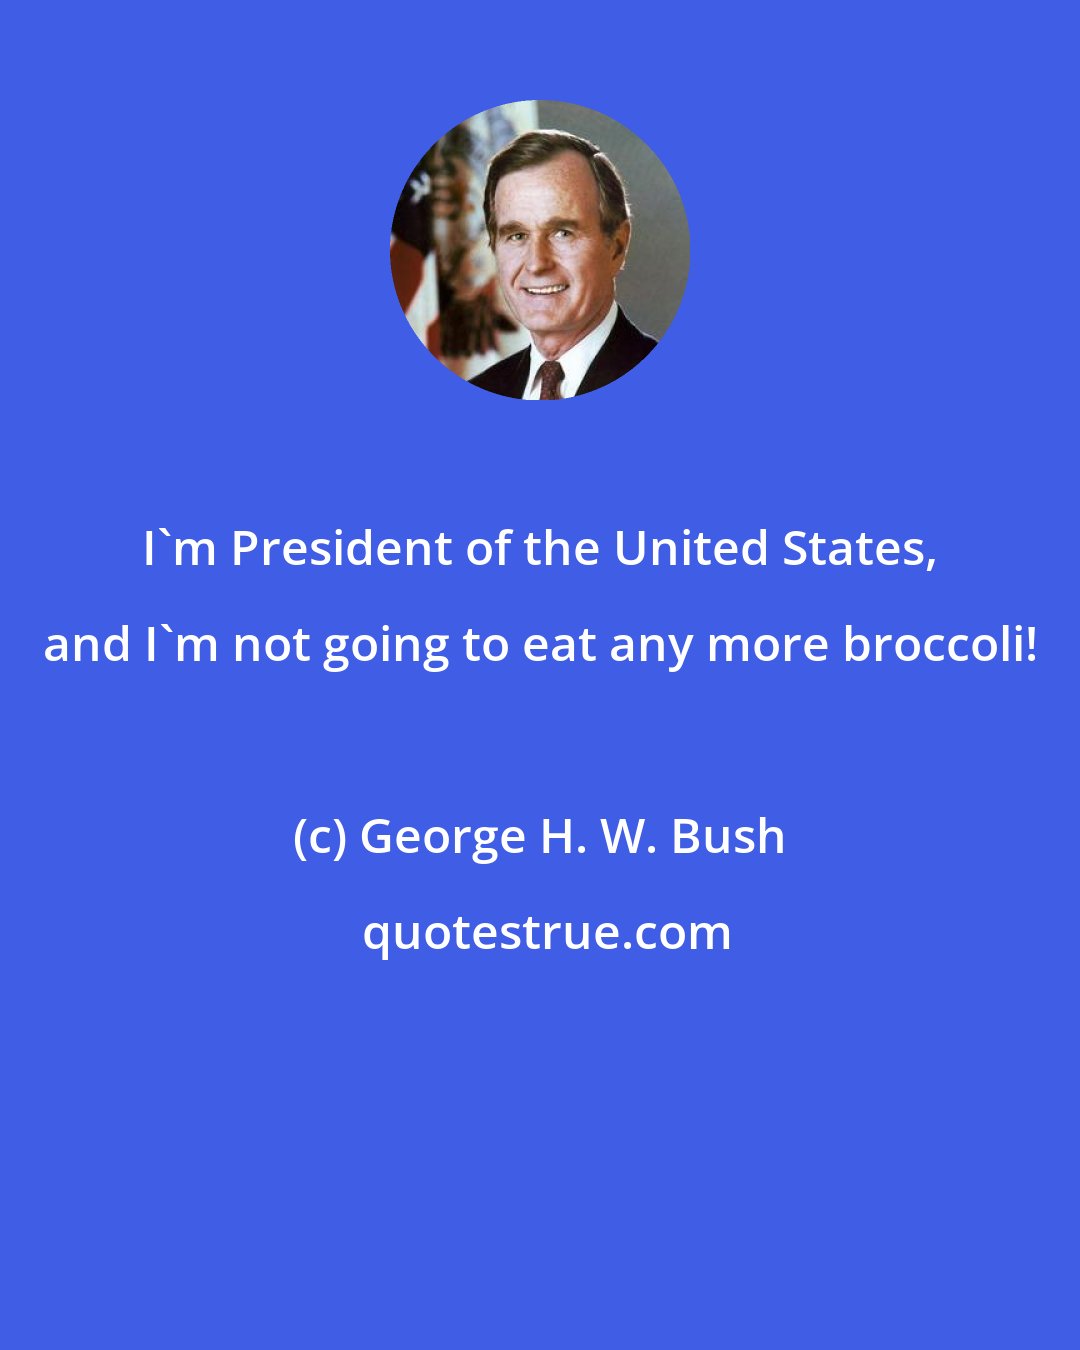 George H. W. Bush: I'm President of the United States, and I'm not going to eat any more broccoli!